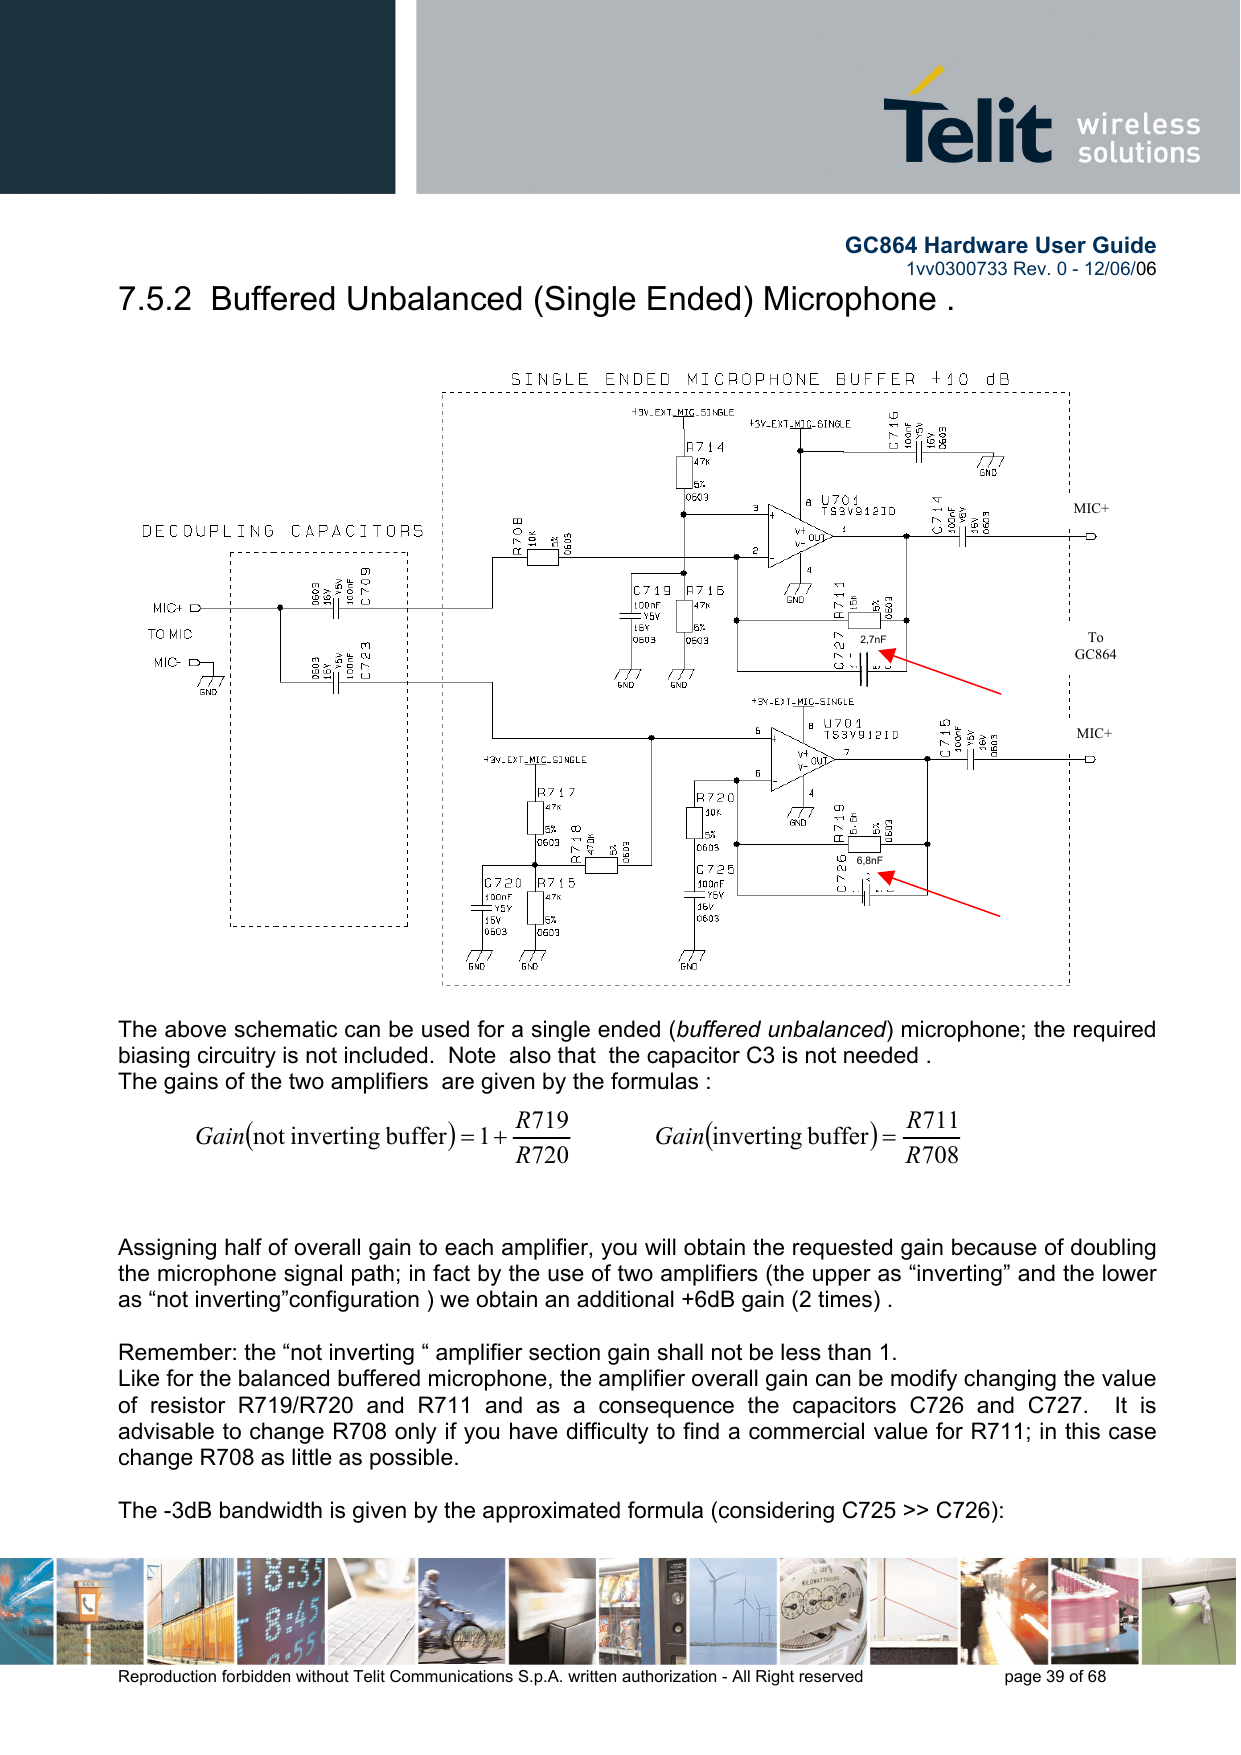        GC864 Hardware User Guide  1vv0300733 Rev. 0 - 12/06/06  Reproduction forbidden without Telit Communications S.p.A. written authorization - All Right reserved    page 39 of 68  7.5.2  Buffered Unbalanced (Single Ended) Microphone .    The above schematic can be used for a single ended (buffered unbalanced) microphone; the required biasing circuitry is not included.  Note  also that  the capacitor C3 is not needed . The gains of the two amplifiers  are given by the formulas :  ()7207191buffer invertingnot  RRGain +=             ()708711buffer inverting RRGain =     Assigning half of overall gain to each amplifier, you will obtain the requested gain because of doubling the microphone signal path; in fact by the use of two amplifiers (the upper as “inverting” and the lower as “not inverting”configuration ) we obtain an additional +6dB gain (2 times) .  Remember: the “not inverting “ amplifier section gain shall not be less than 1.   Like for the balanced buffered microphone, the amplifier overall gain can be modify changing the value of resistor R719/R720 and R711 and as a consequence the capacitors C726 and C727.  It is advisable to change R708 only if you have difficulty to find a commercial value for R711; in this case change R708 as little as possible.    The -3dB bandwidth is given by the approximated formula (considering C725 &gt;&gt; C726):  To GC864 MIC+ MIC+ 2,7nF 6,8nF 